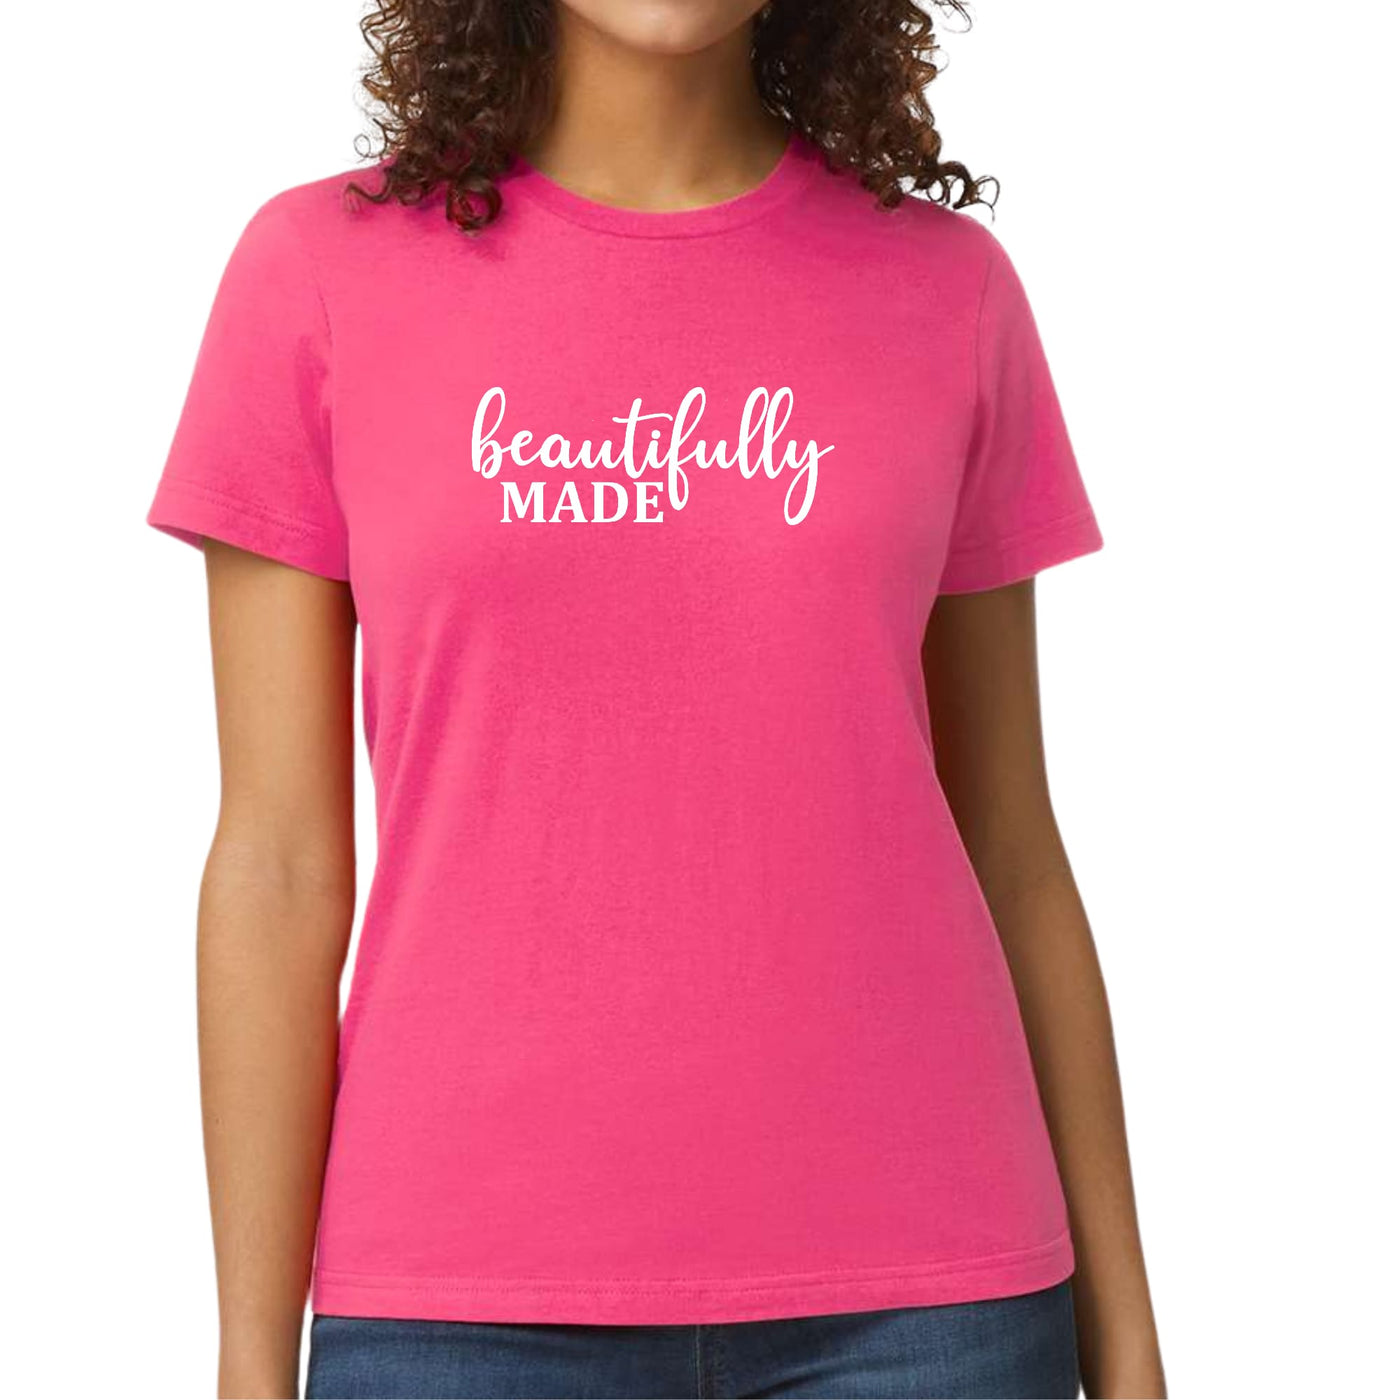 Womens Graphic T-shirt Beautifully Made Inspiration Affirmation - Womens